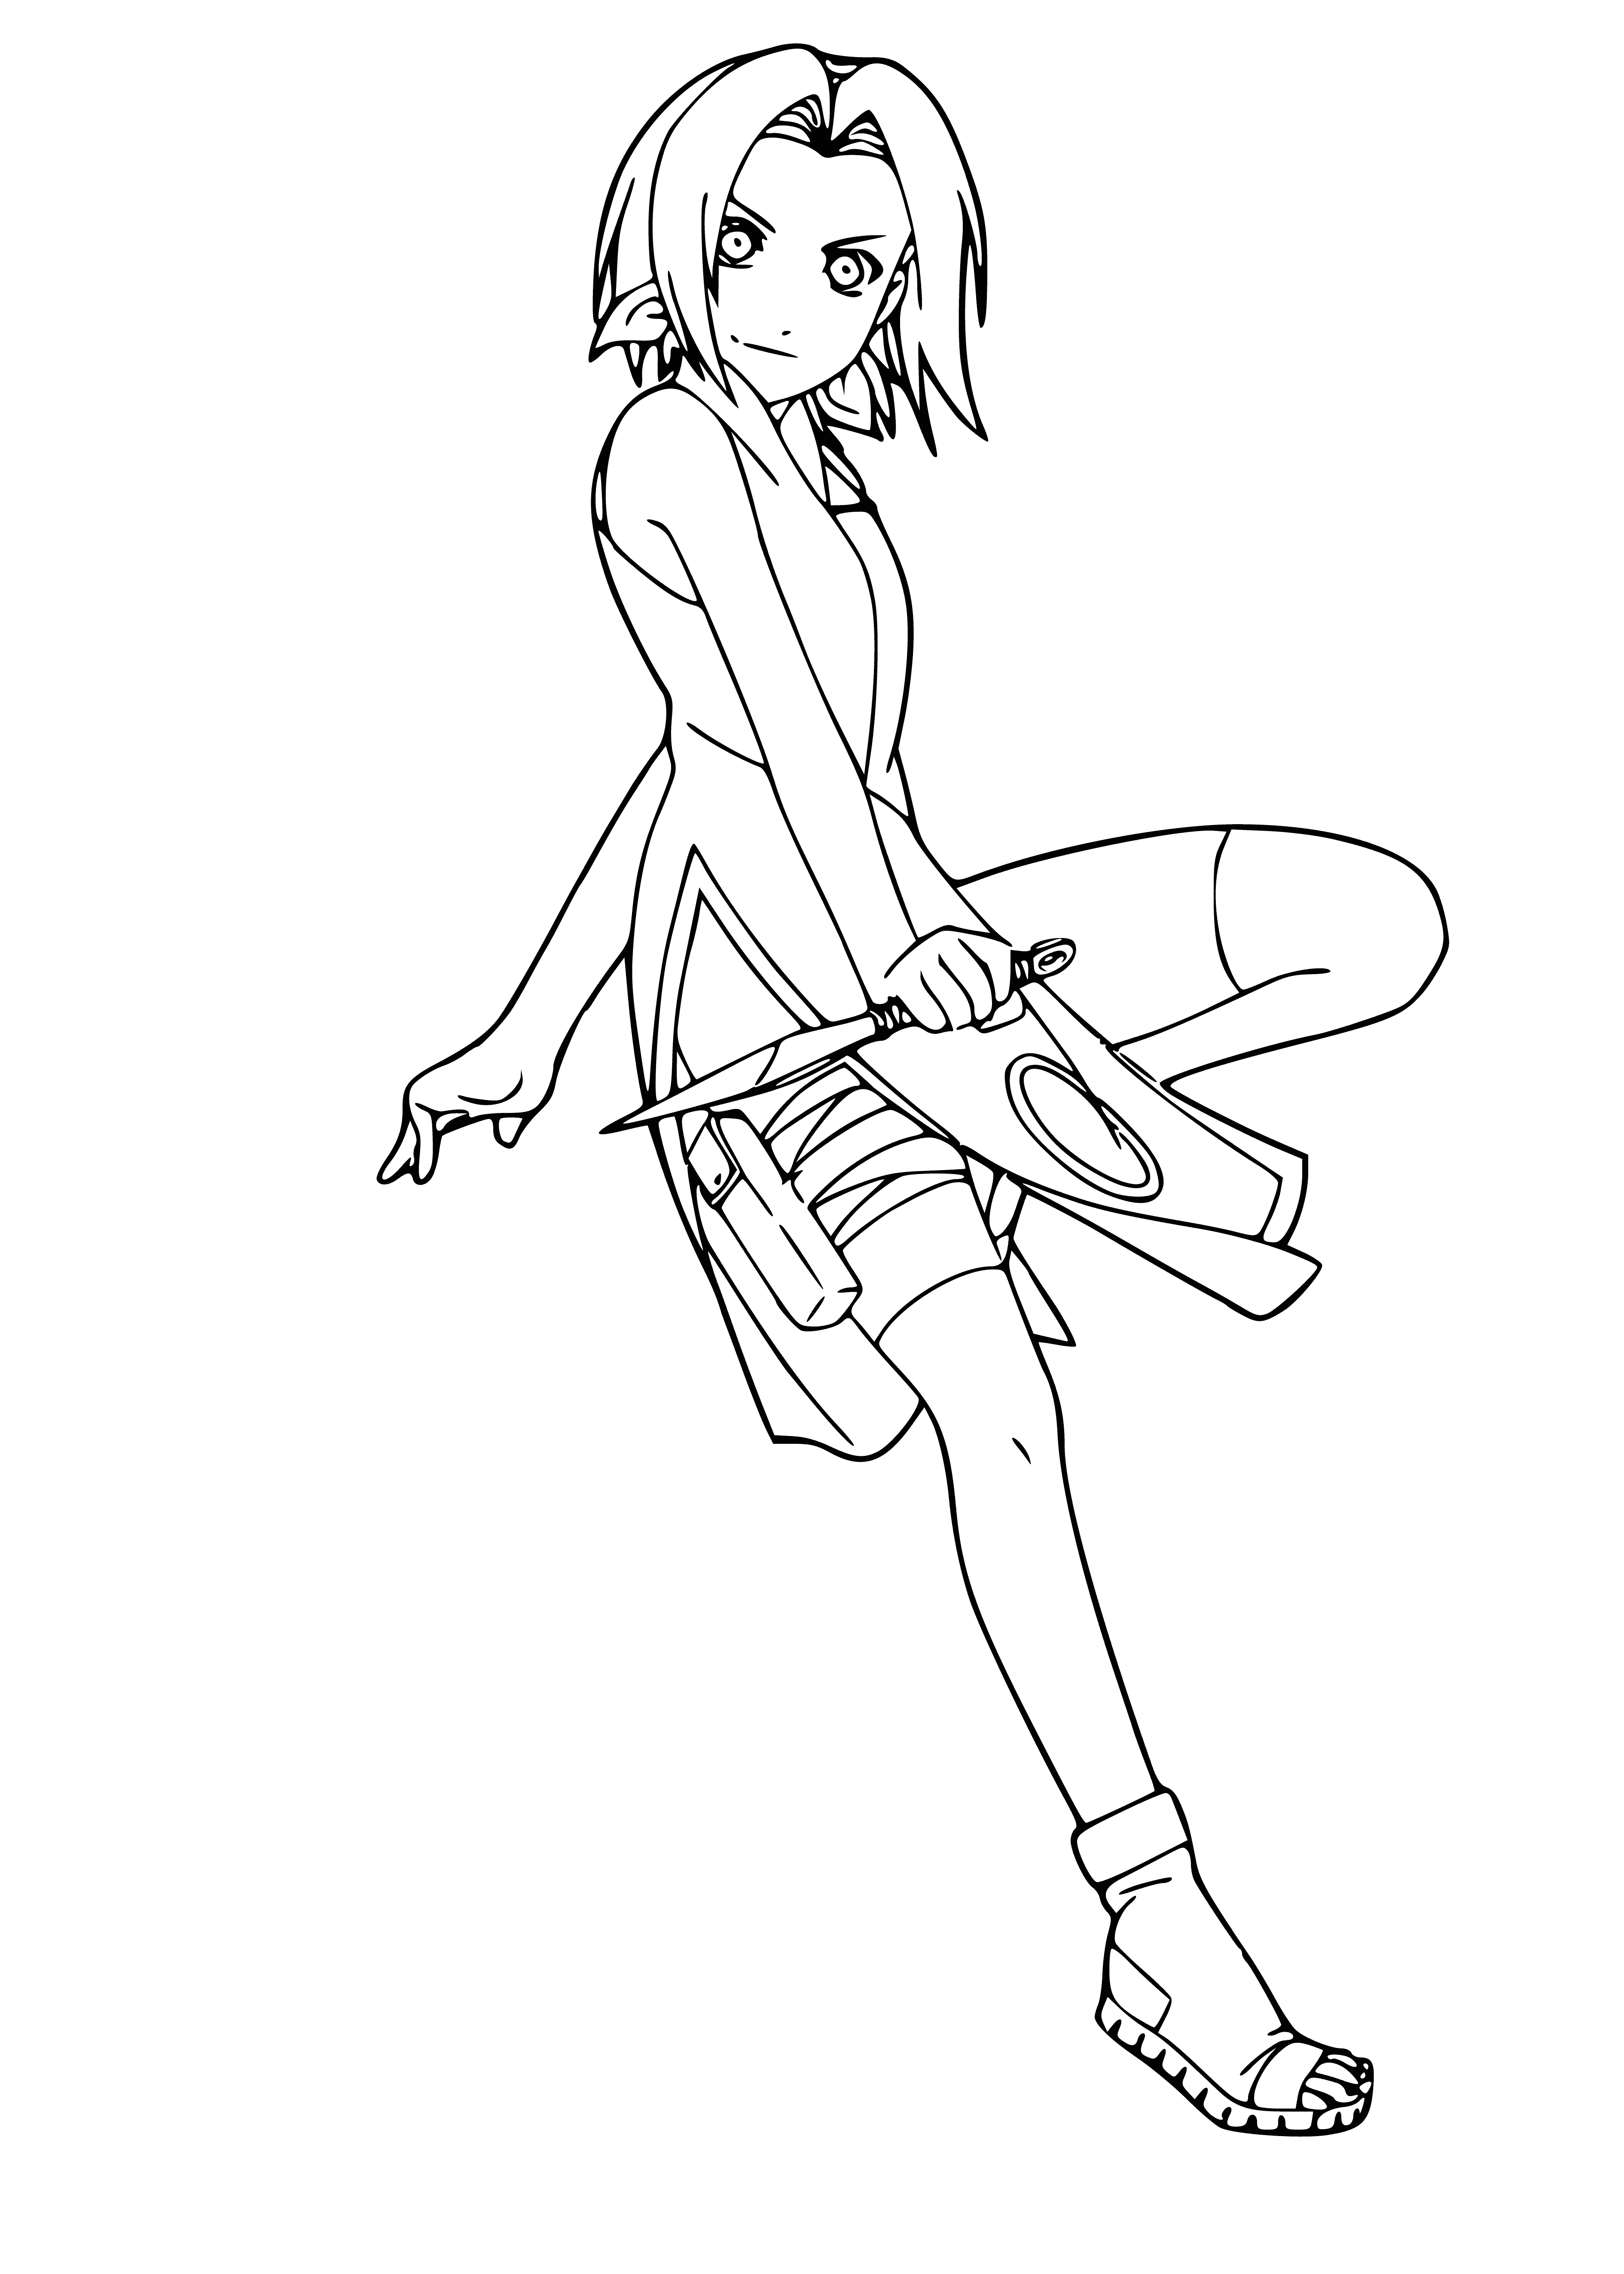 coloring page: Sakura Haruno is a young pink-haired girl with a red & white outfit and blue backpack, carrying a red & white fan.